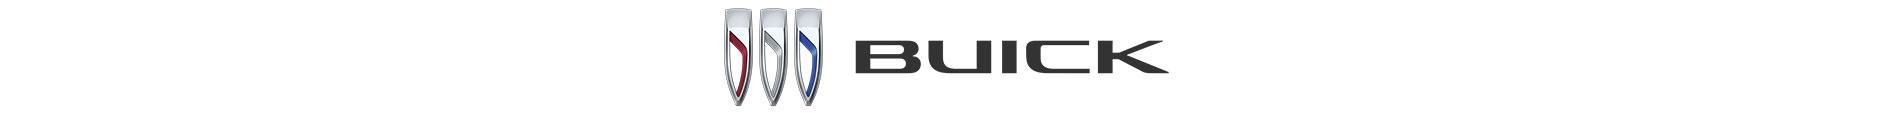 Buick Logo Home Page